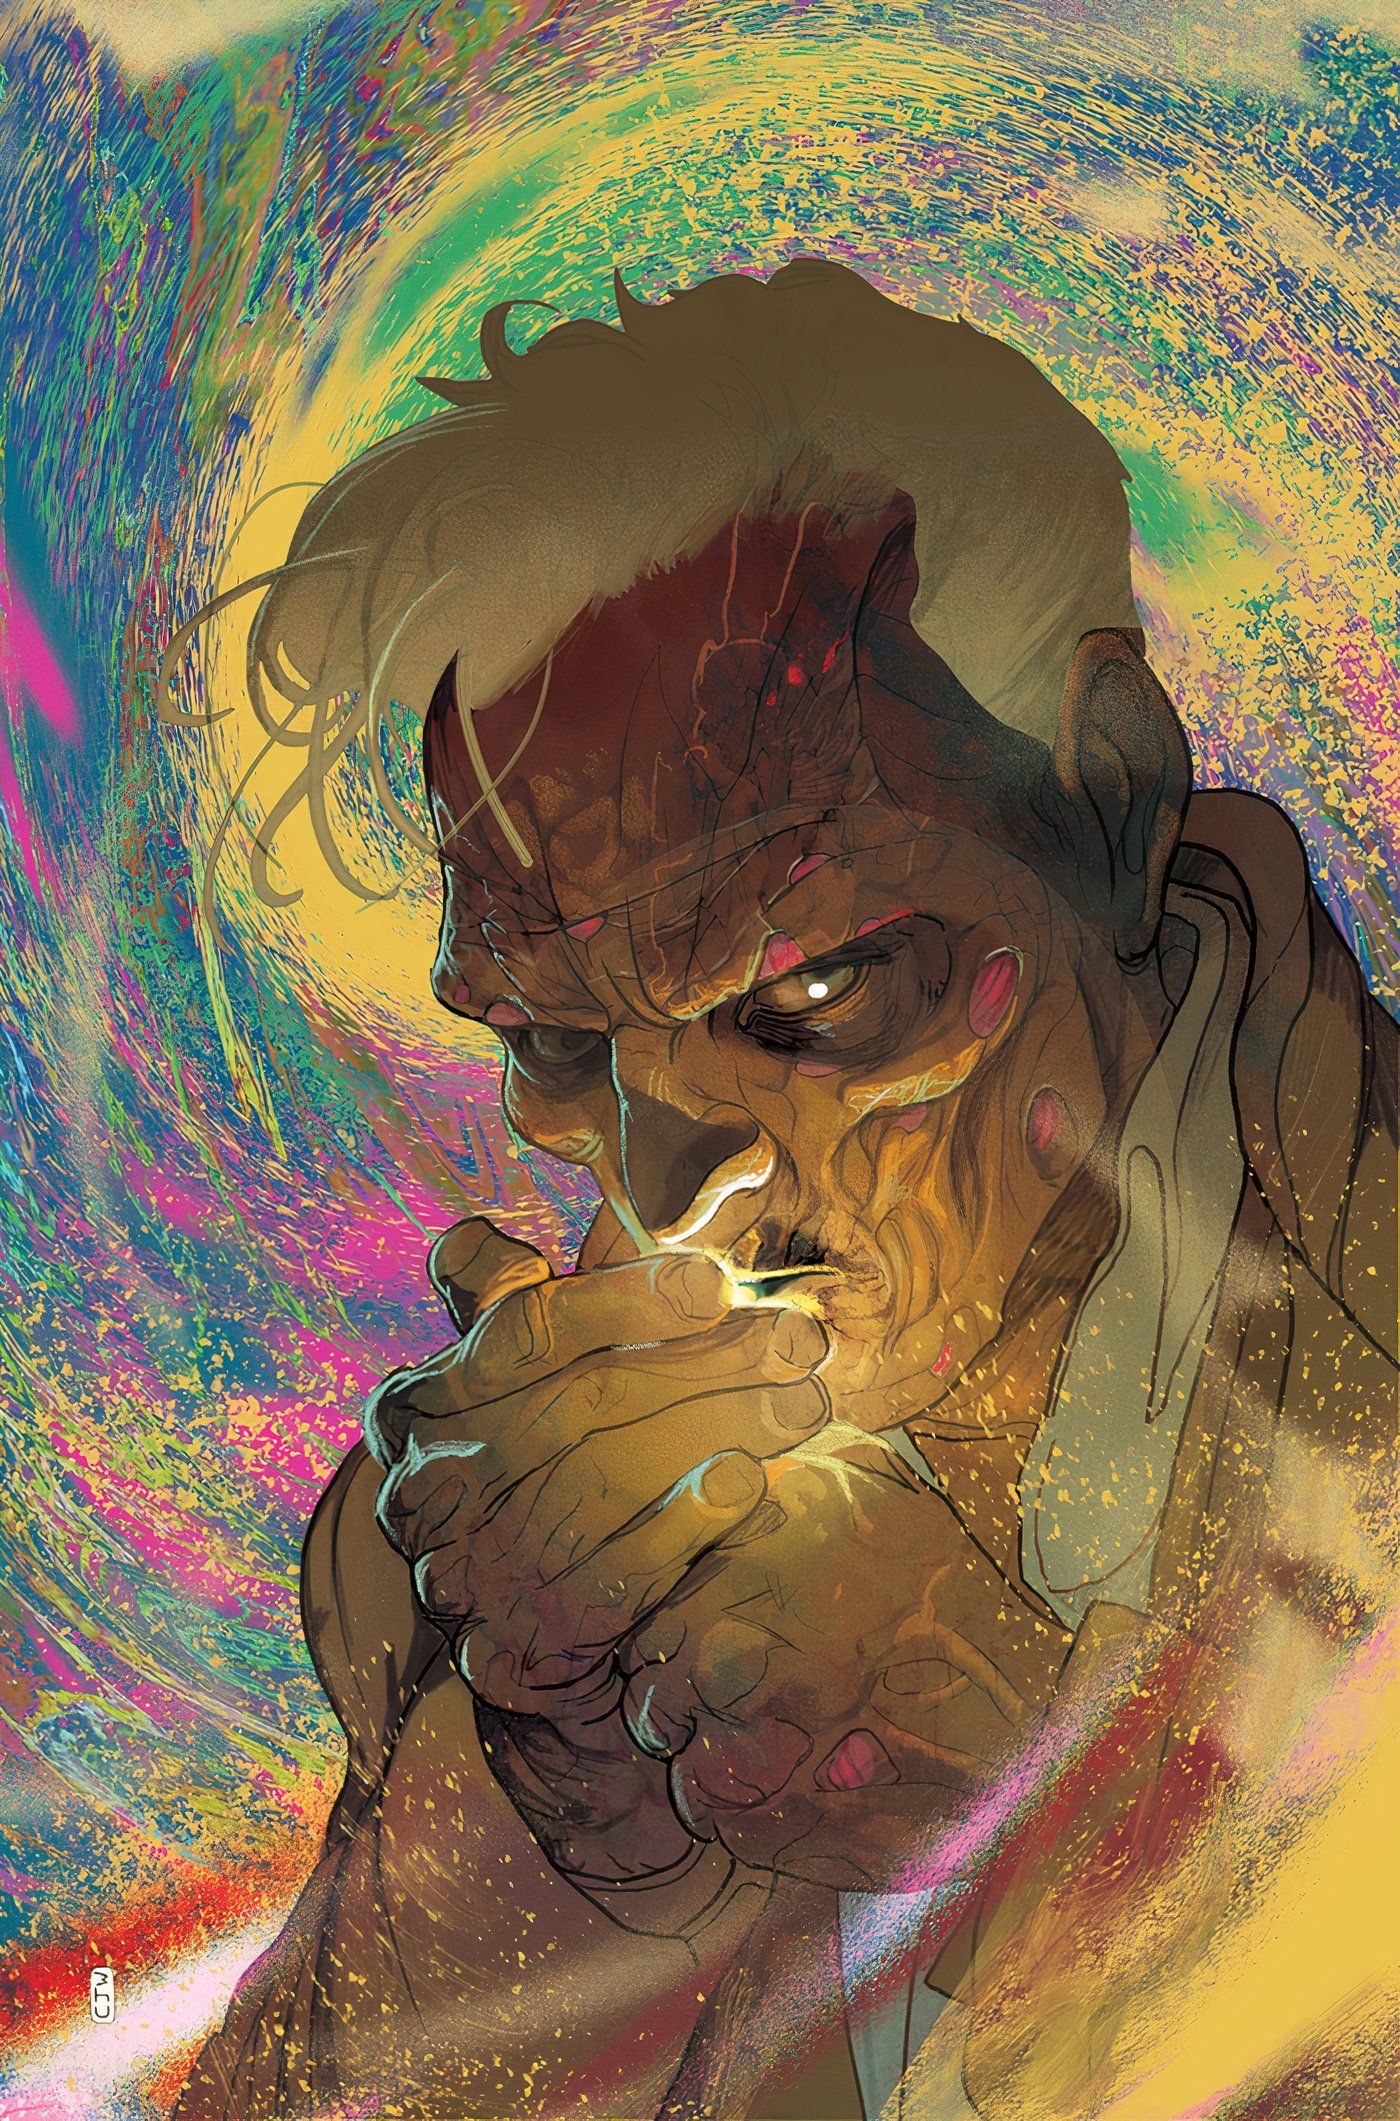 John Constantine, Hellblazer: Dead in America, a decaying Constantine lighting a cigarette against a psychedelic backdrop.